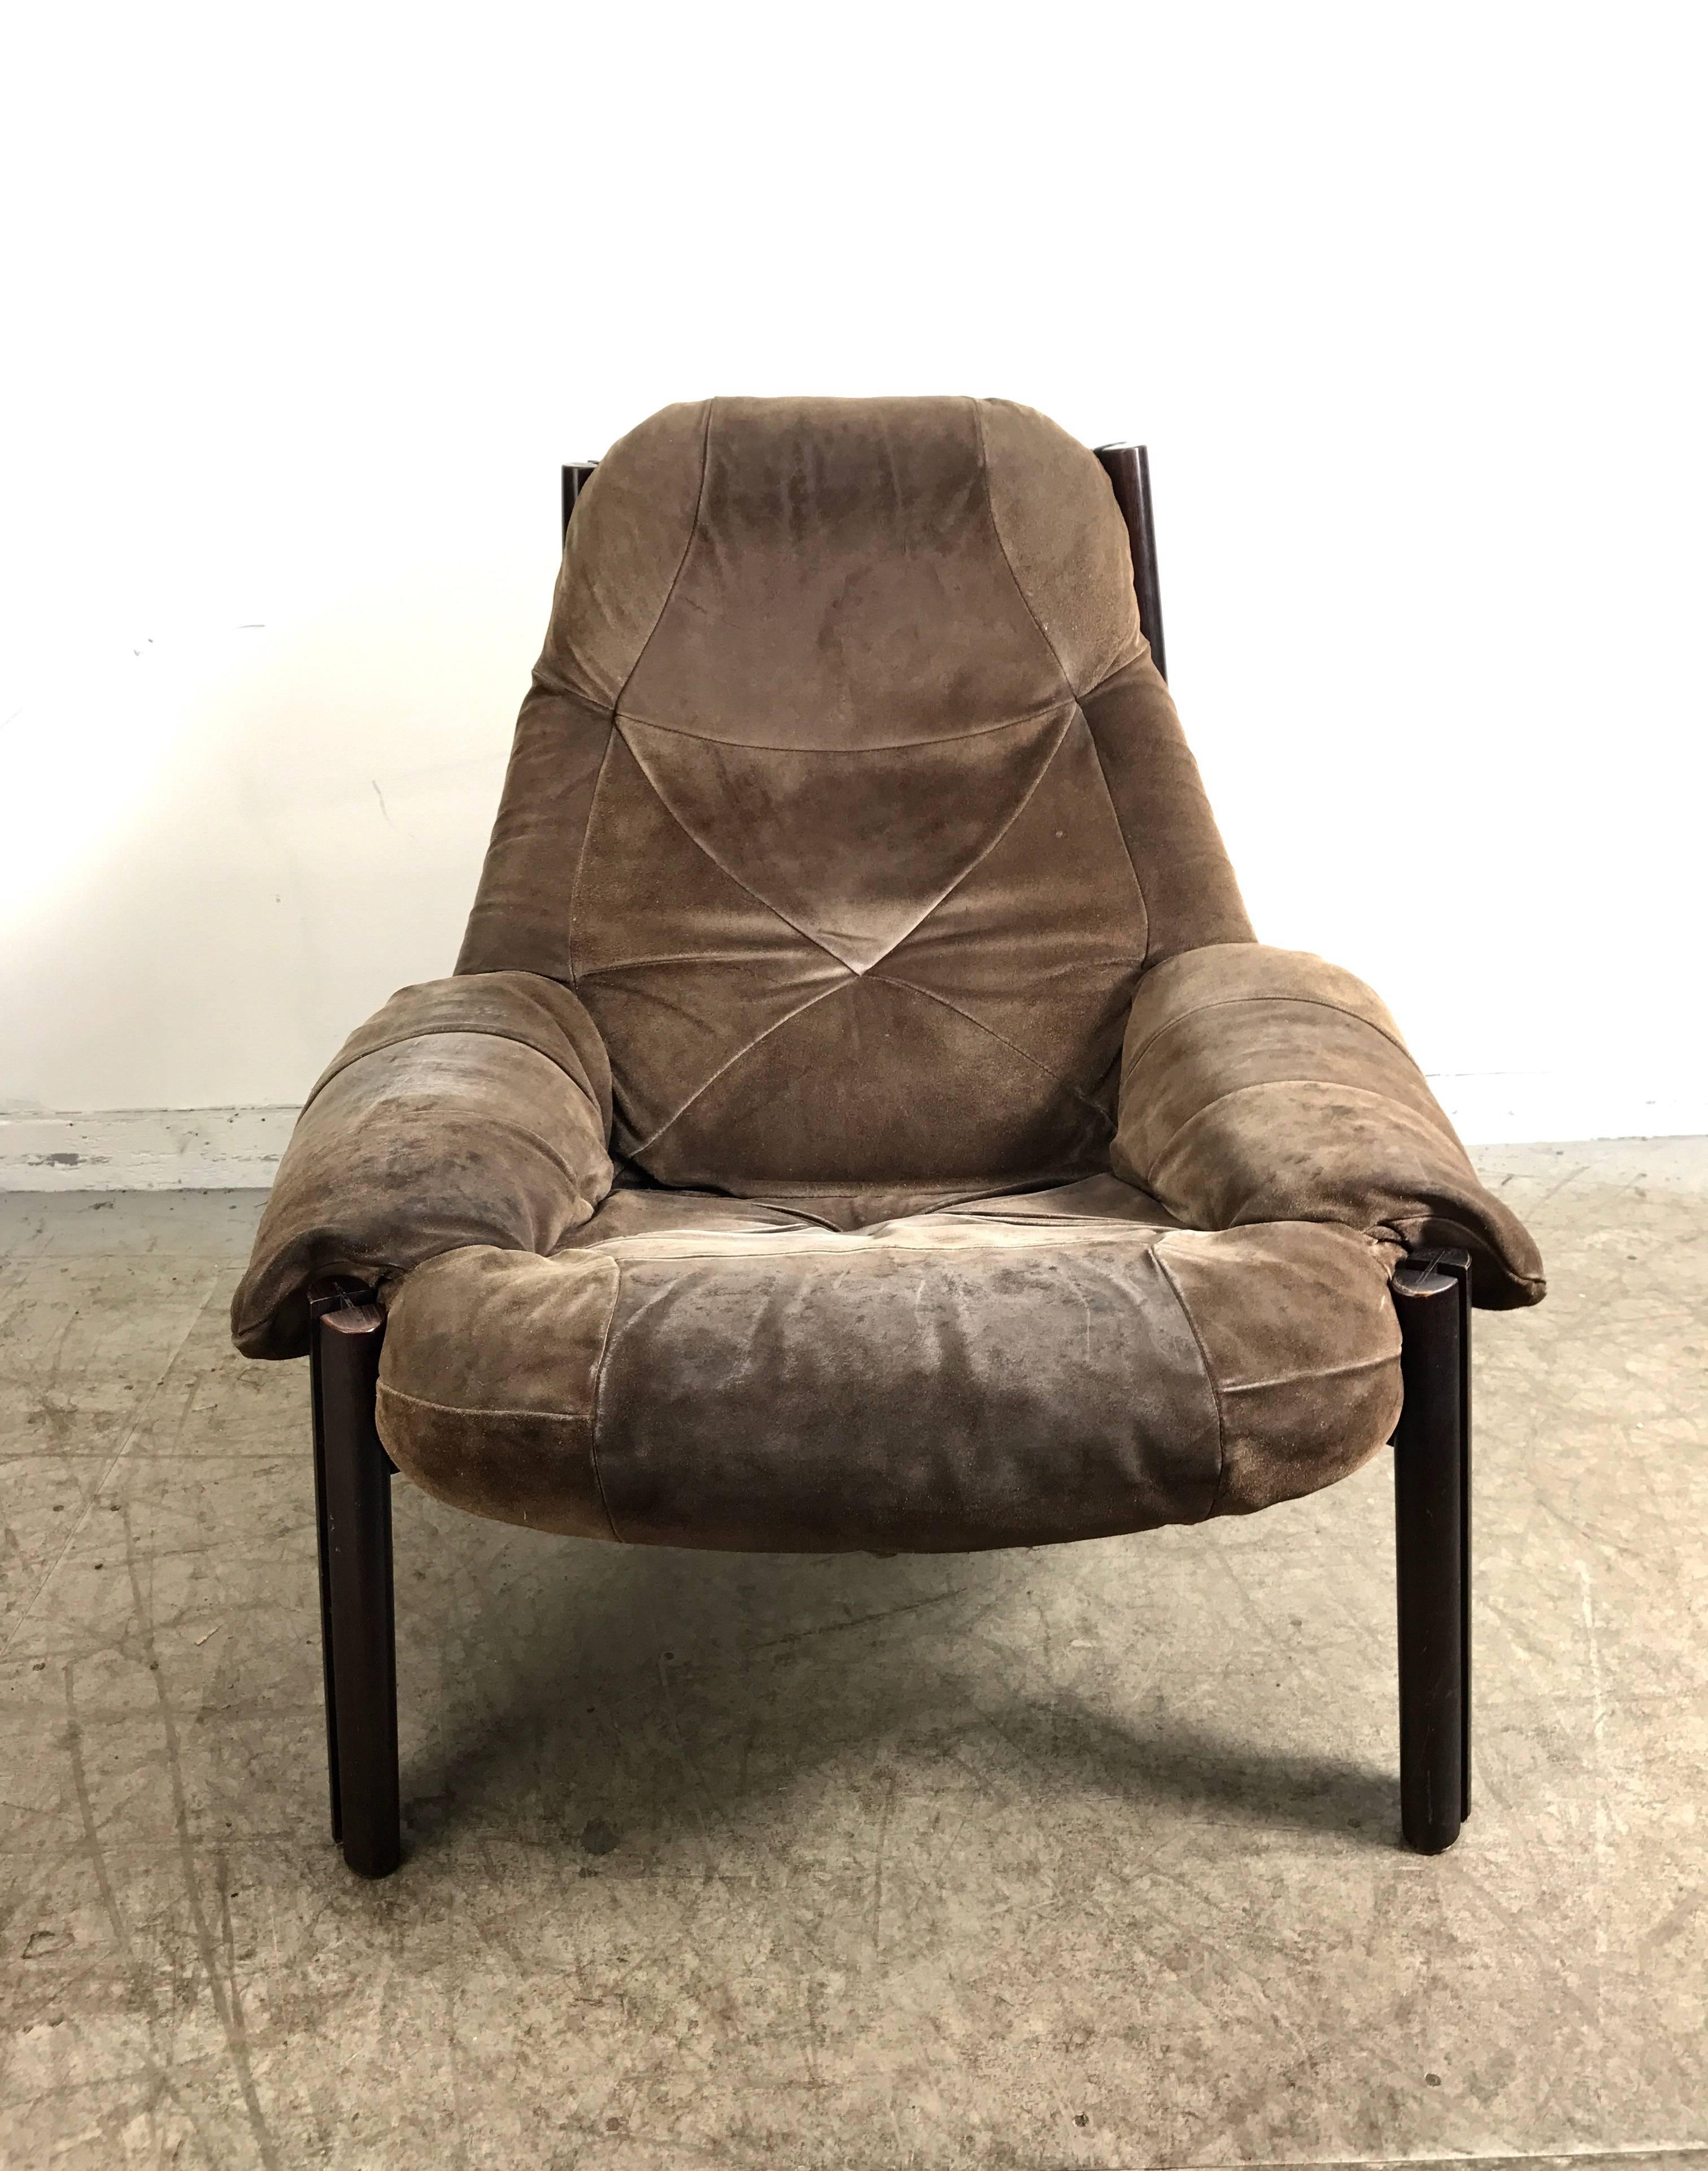 Modernist rosewood and suede lounge sling chair by Percival Lafer, circa 1967, made in Brazil, retains original suede cover.